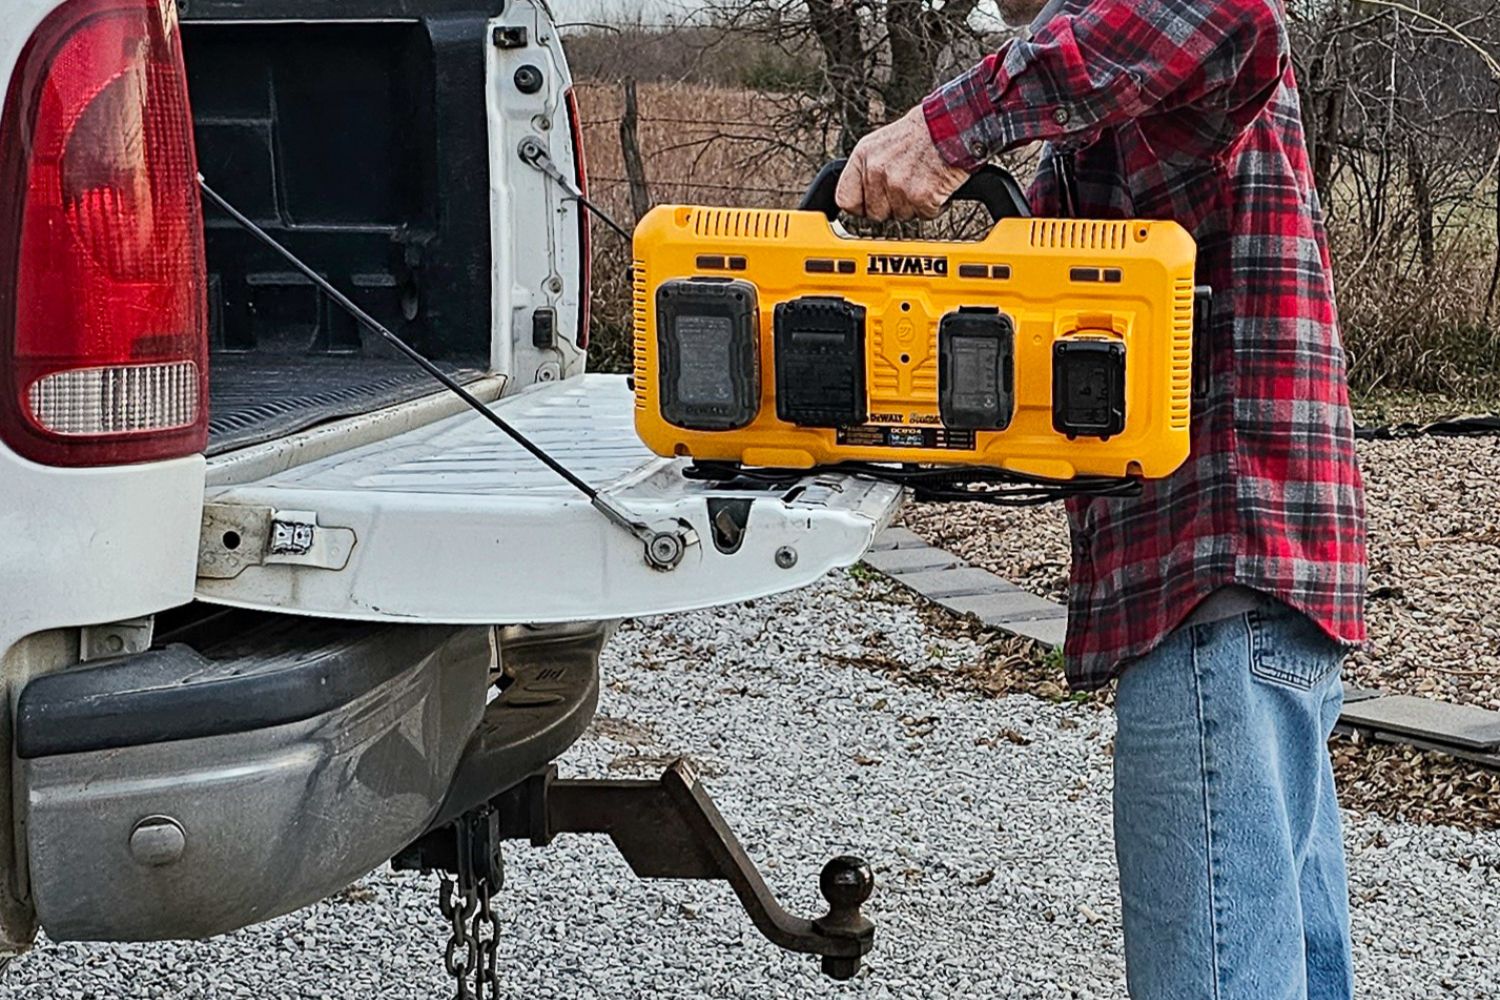 The Dewalt Charging Station with several power tool batteries plugged in for charging while getting loaded into a truck bed.